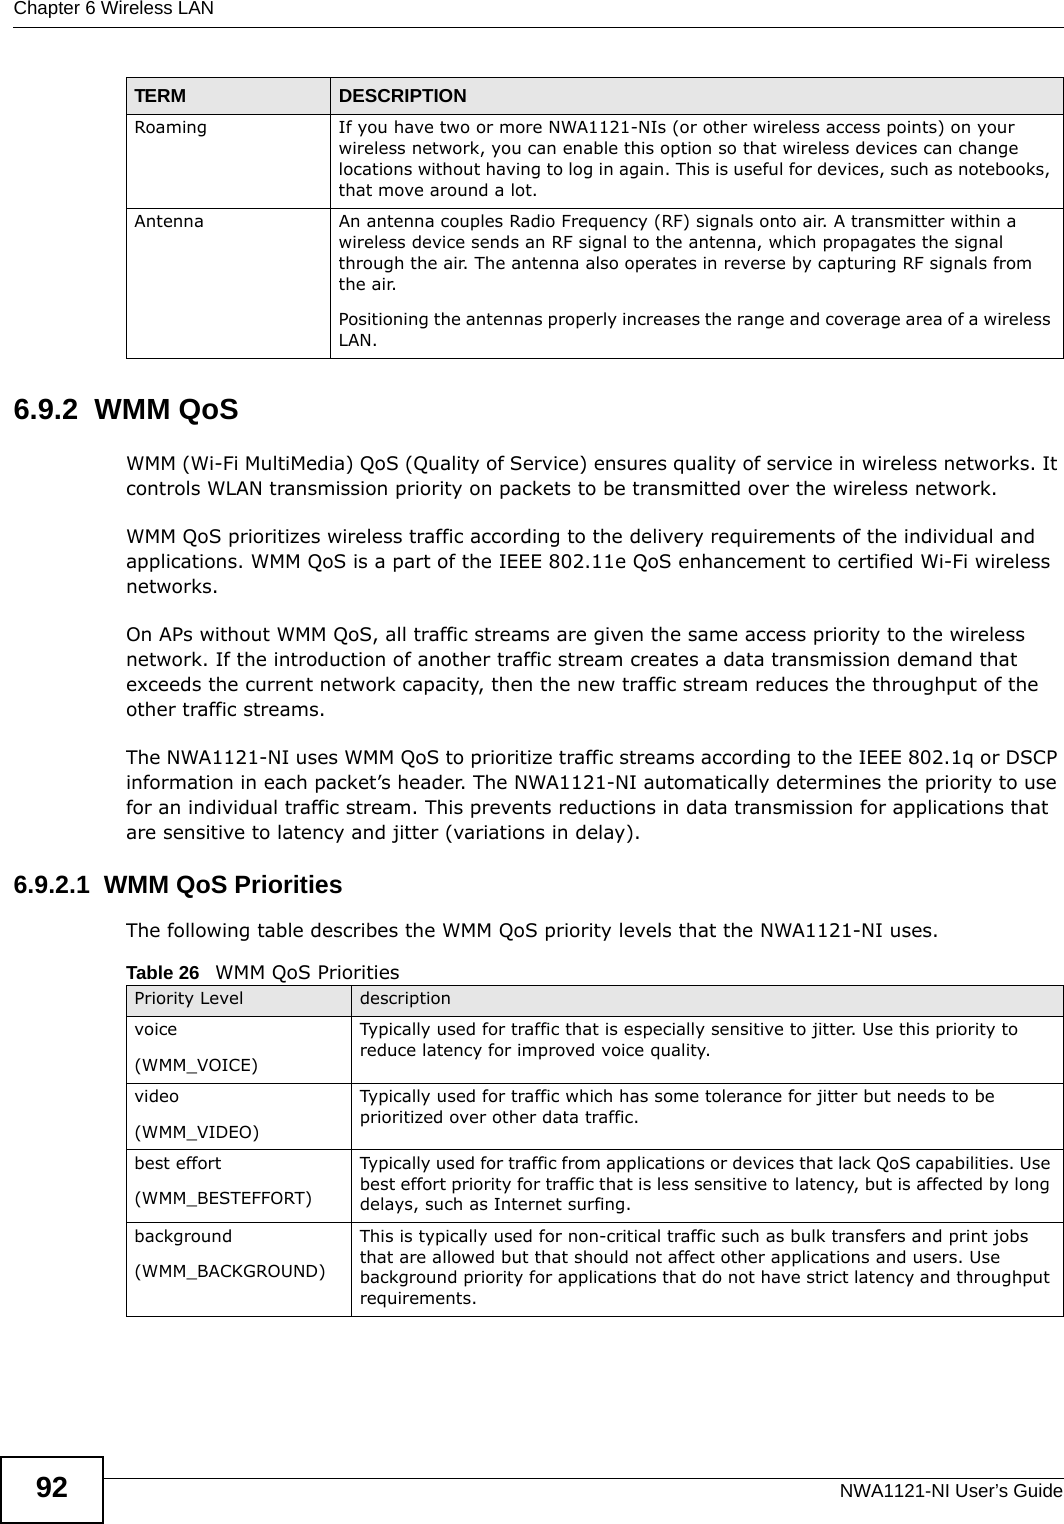 Chapter 6 Wireless LANNWA1121-NI User’s Guide926.9.2  WMM QoSWMM (Wi-Fi MultiMedia) QoS (Quality of Service) ensures quality of service in wireless networks. It controls WLAN transmission priority on packets to be transmitted over the wireless network.WMM QoS prioritizes wireless traffic according to the delivery requirements of the individual and applications. WMM QoS is a part of the IEEE 802.11e QoS enhancement to certified Wi-Fi wireless networks.On APs without WMM QoS, all traffic streams are given the same access priority to the wireless network. If the introduction of another traffic stream creates a data transmission demand that exceeds the current network capacity, then the new traffic stream reduces the throughput of the other traffic streams.The NWA1121-NI uses WMM QoS to prioritize traffic streams according to the IEEE 802.1q or DSCP information in each packet’s header. The NWA1121-NI automatically determines the priority to use for an individual traffic stream. This prevents reductions in data transmission for applications that are sensitive to latency and jitter (variations in delay).6.9.2.1  WMM QoS PrioritiesThe following table describes the WMM QoS priority levels that the NWA1121-NI uses.Roaming If you have two or more NWA1121-NIs (or other wireless access points) on your wireless network, you can enable this option so that wireless devices can change locations without having to log in again. This is useful for devices, such as notebooks, that move around a lot.Antenna An antenna couples Radio Frequency (RF) signals onto air. A transmitter within a wireless device sends an RF signal to the antenna, which propagates the signal through the air. The antenna also operates in reverse by capturing RF signals from the air. Positioning the antennas properly increases the range and coverage area of a wireless LAN. TERM DESCRIPTIONTable 26   WMM QoS PrioritiesPriority Level descriptionvoice(WMM_VOICE)Typically used for traffic that is especially sensitive to jitter. Use this priority to reduce latency for improved voice quality.video(WMM_VIDEO)Typically used for traffic which has some tolerance for jitter but needs to be prioritized over other data traffic.best effort(WMM_BESTEFFORT)Typically used for traffic from applications or devices that lack QoS capabilities. Use best effort priority for traffic that is less sensitive to latency, but is affected by long delays, such as Internet surfing.background(WMM_BACKGROUND)This is typically used for non-critical traffic such as bulk transfers and print jobs that are allowed but that should not affect other applications and users. Use background priority for applications that do not have strict latency and throughput requirements.